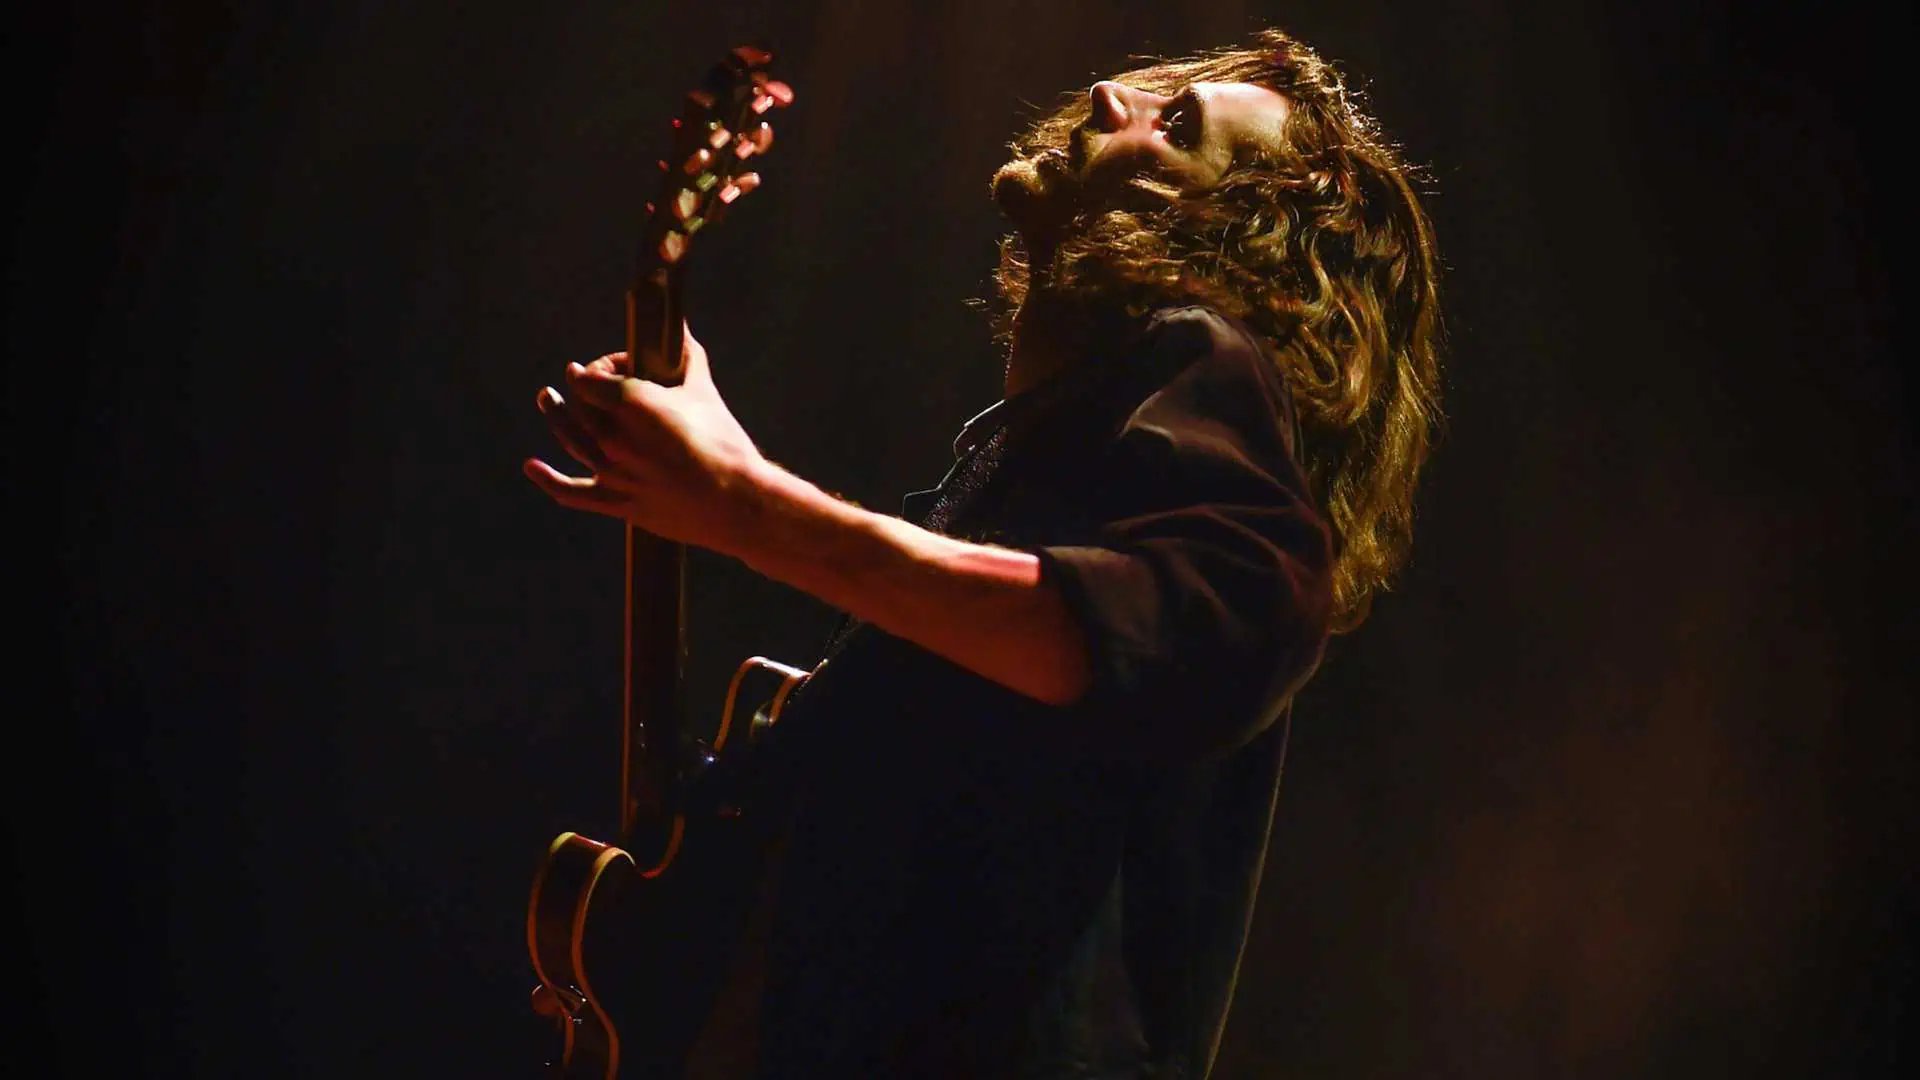 Hozier in profile tilts his face upward while playing guitar